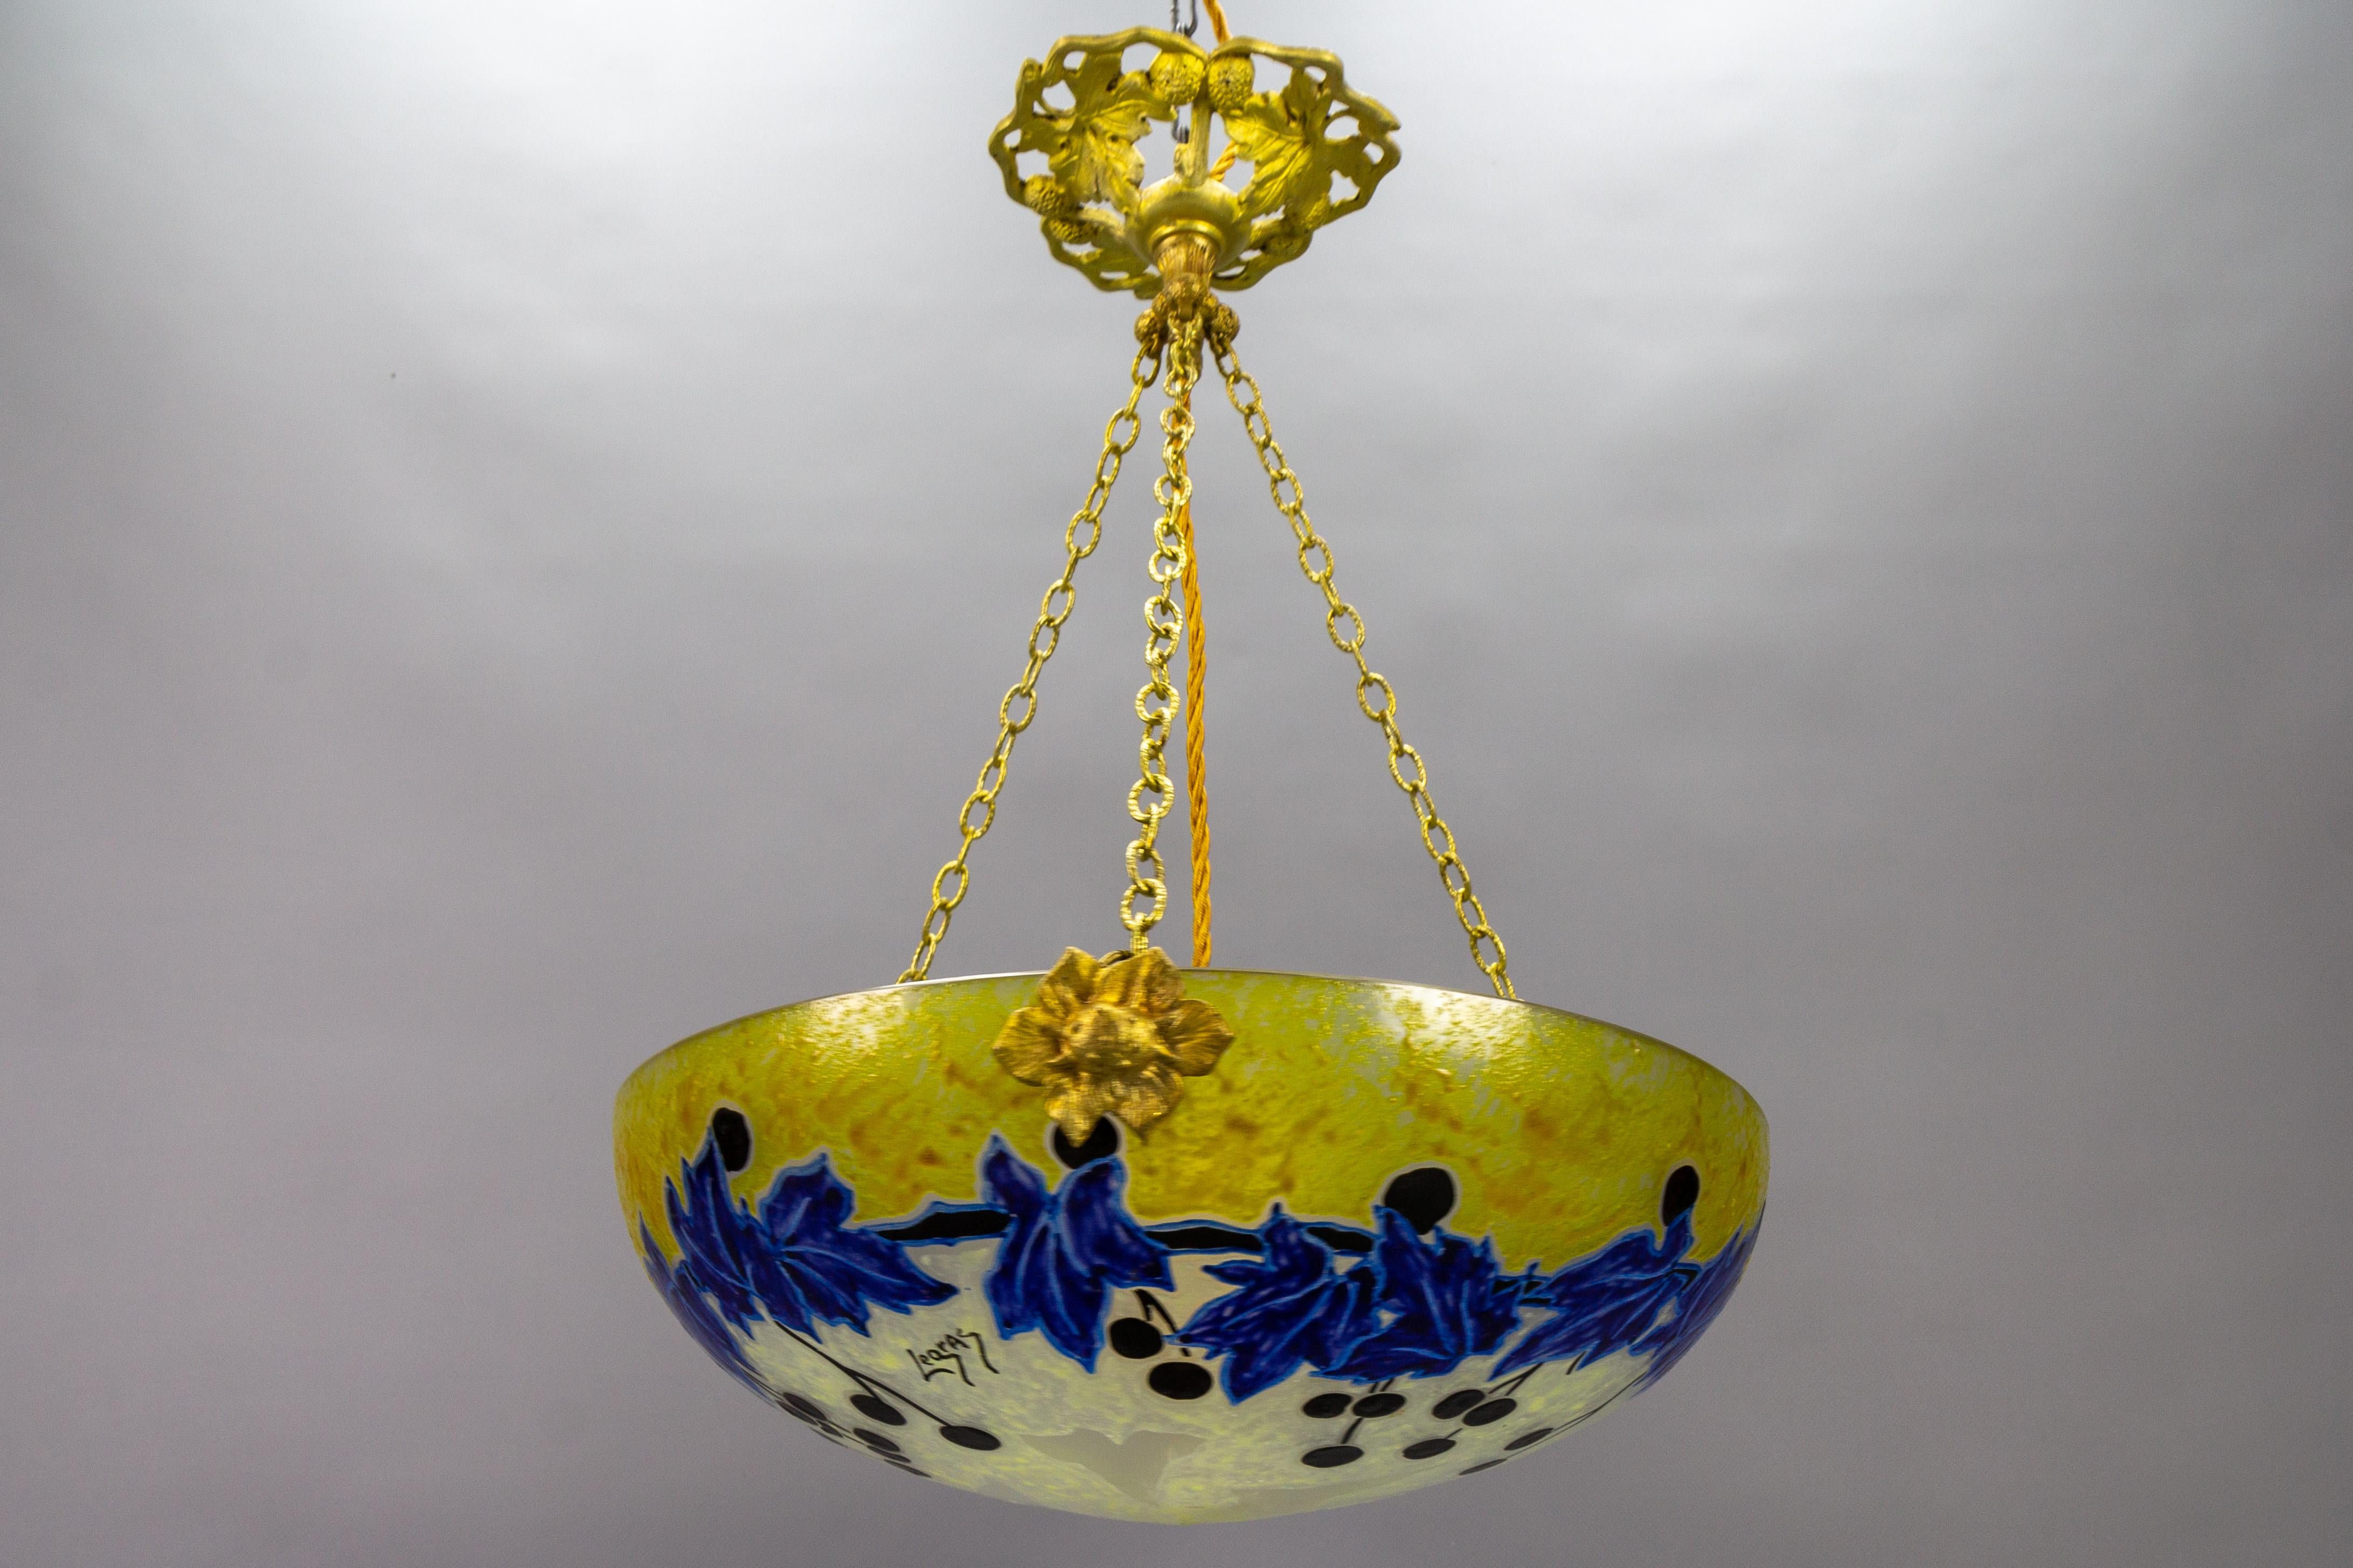 French Art Nouveau Pendant Light with Yellow and Blue Glass Ivy Motifs by Legras For Sale 1